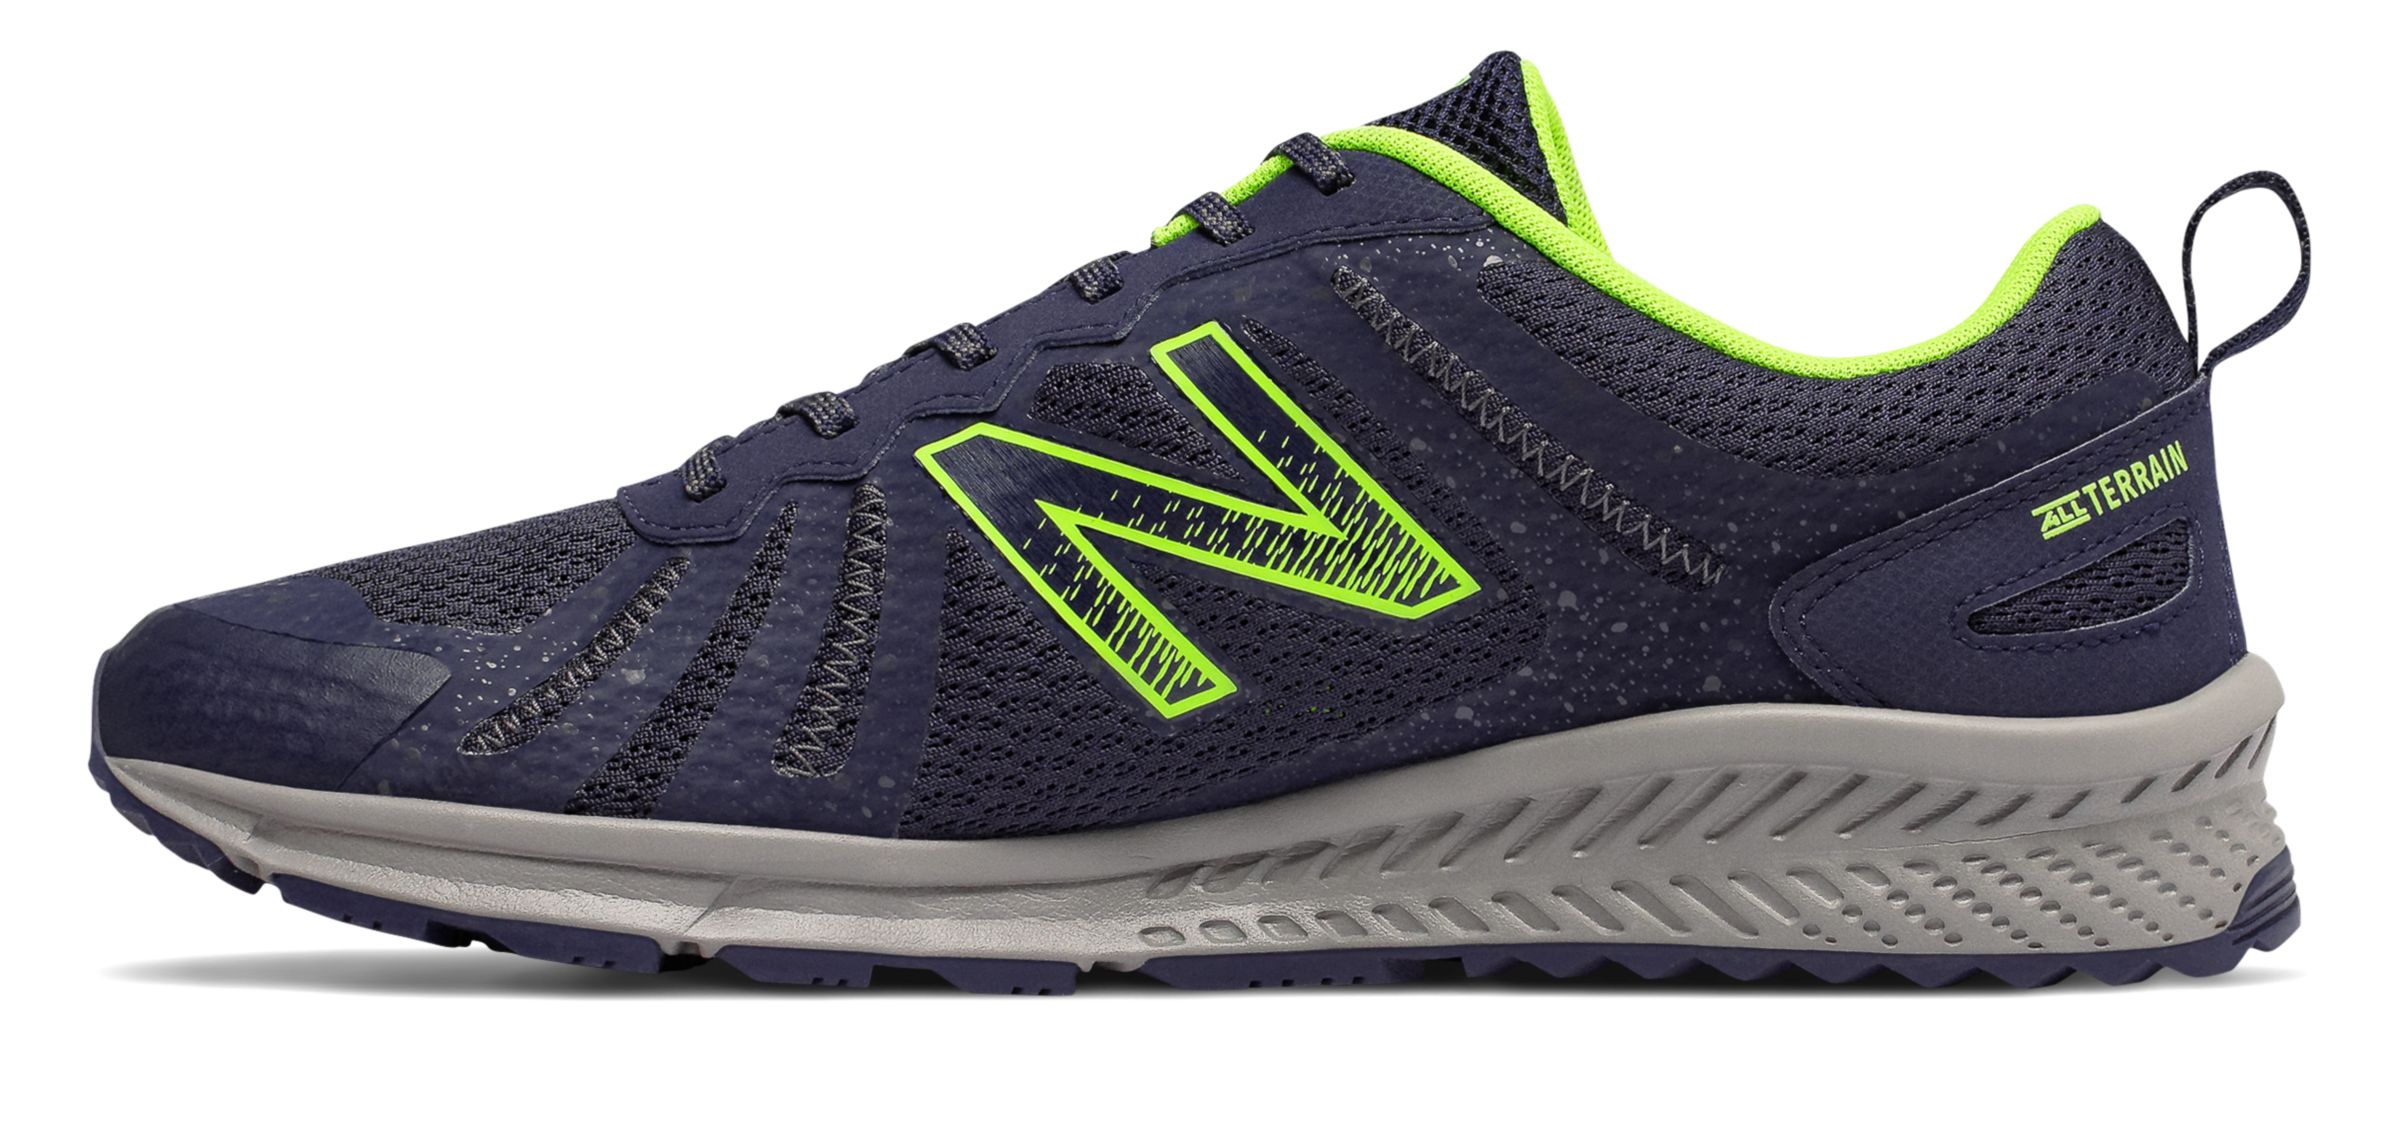 New Balance MT590-V4 on Sale - Discounts Up to 60% Off on MT590LN4 at Joe's New  Balance Outlet